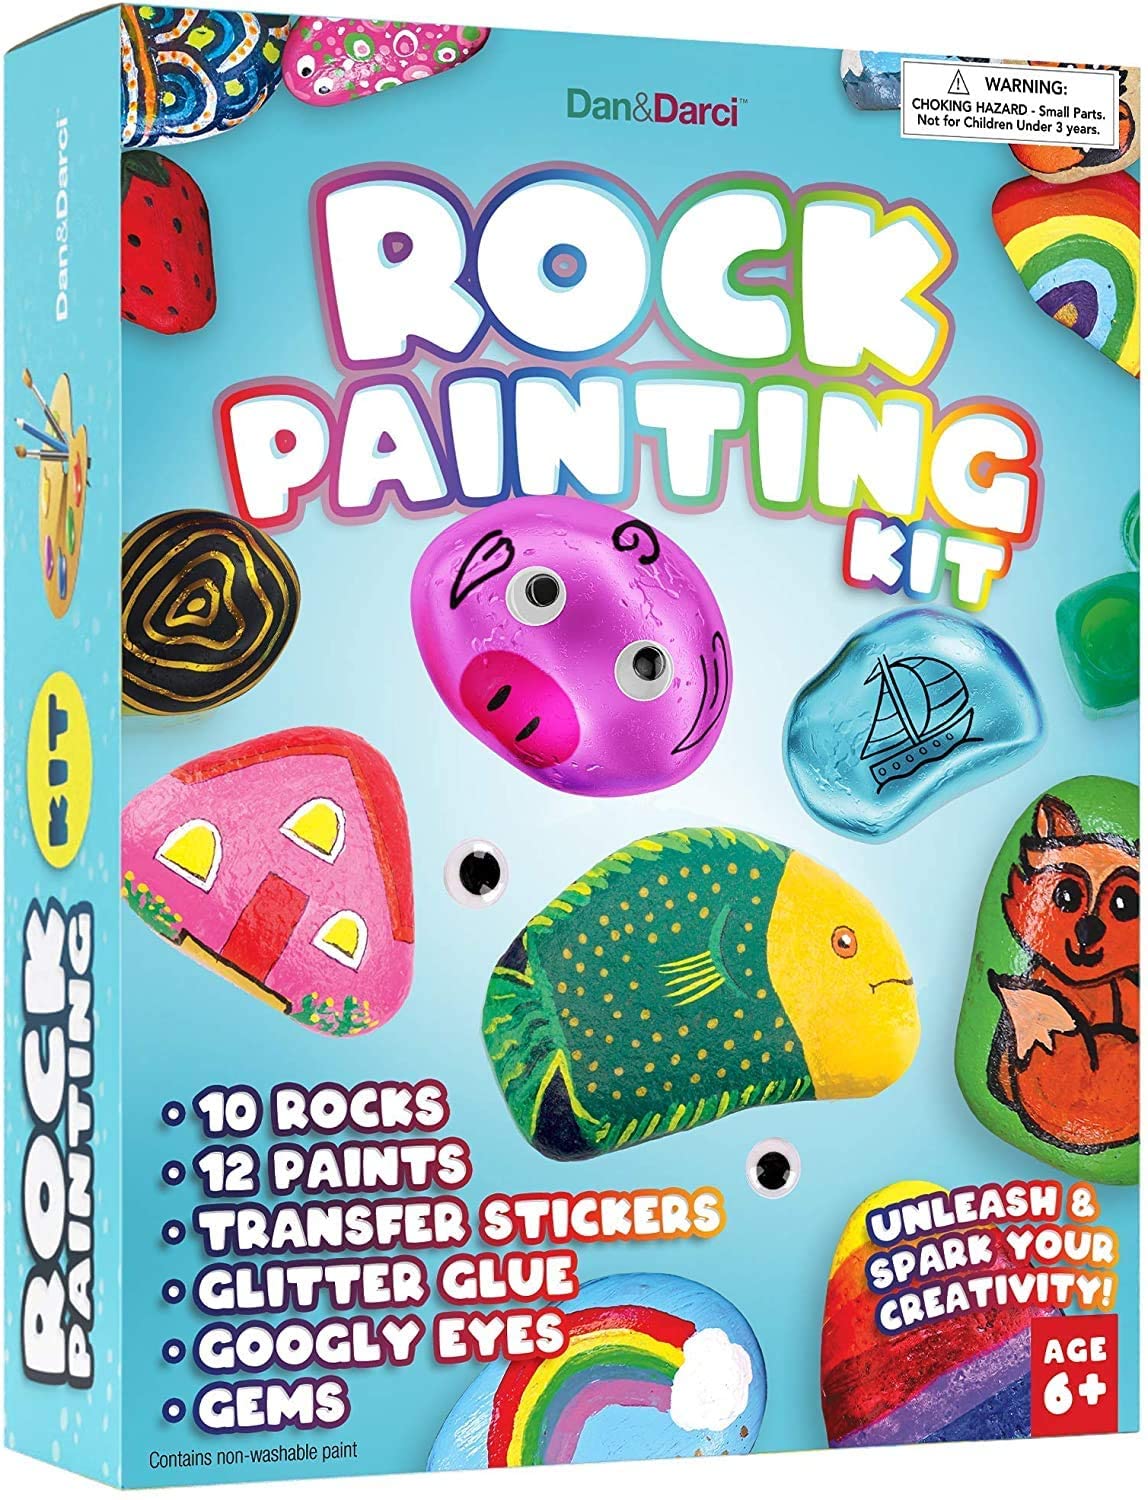 https://www.dontwasteyourmoney.com/wp-content/uploads/2022/03/dandarci-rock-painting-art-kit-for-9-12-year-olds-art-kits-for-9-12-year-olds.jpg